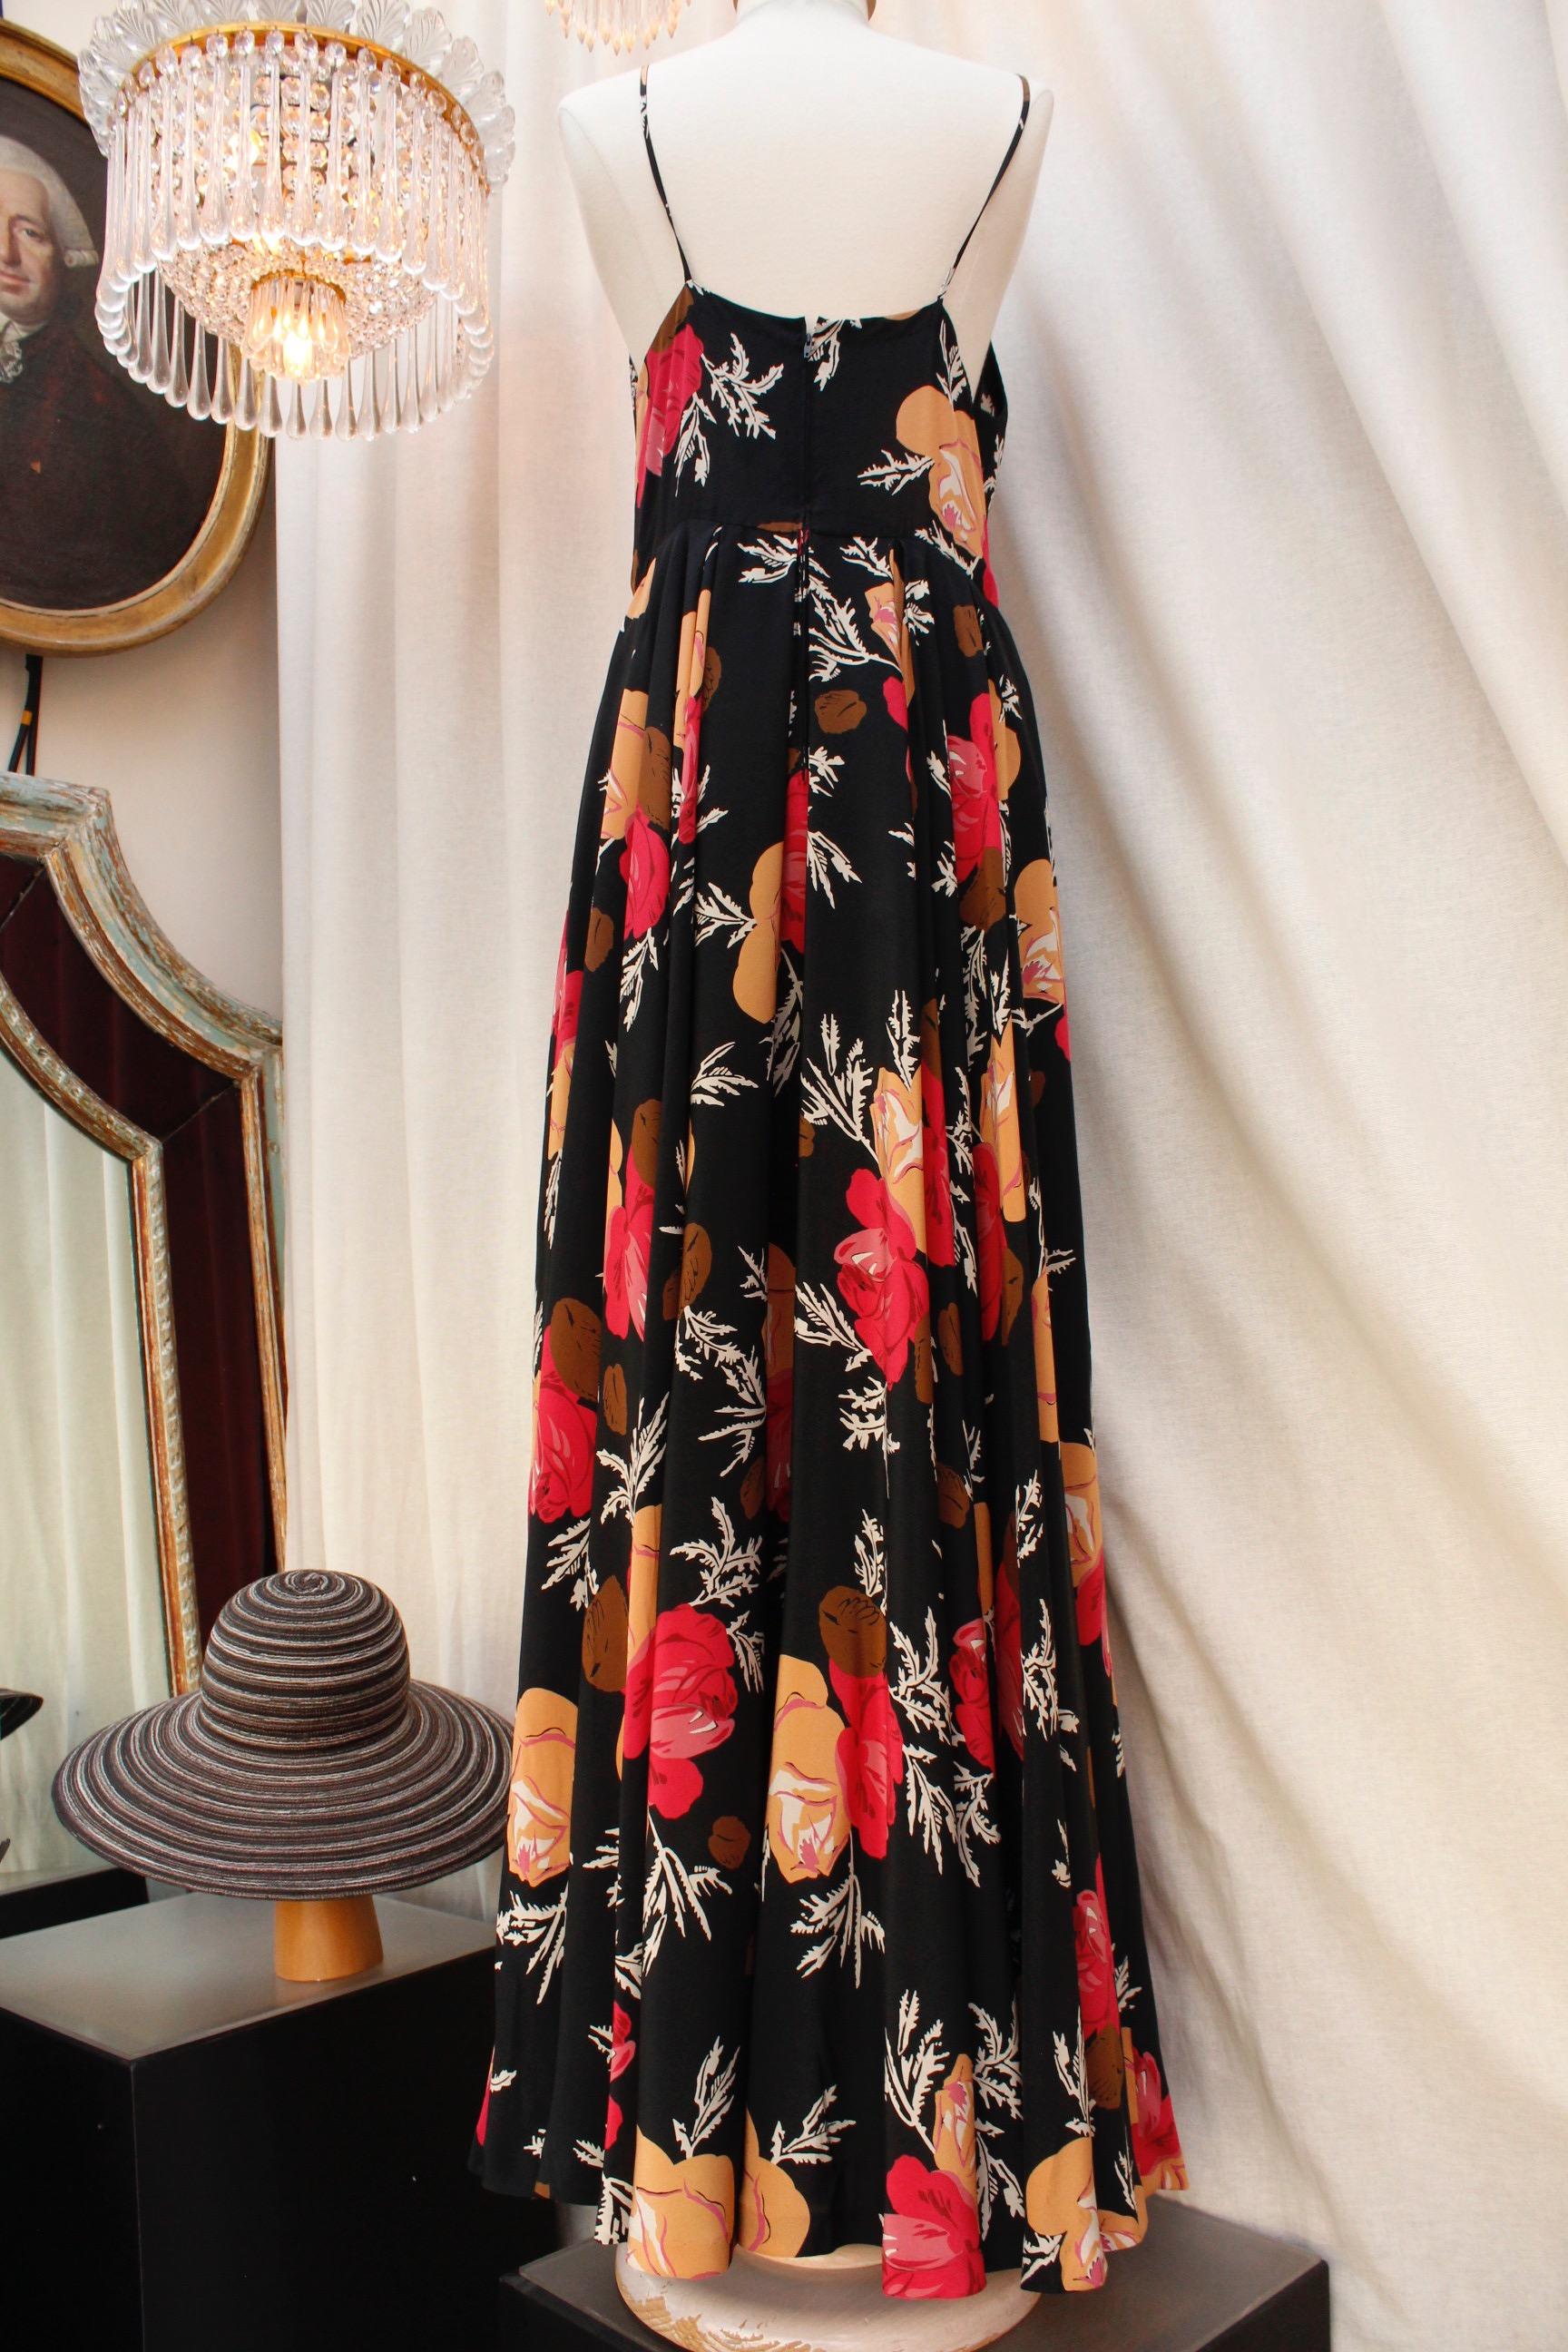 Women's Nina Ricci lovely long dress with a summer jacket made of floral silk For Sale